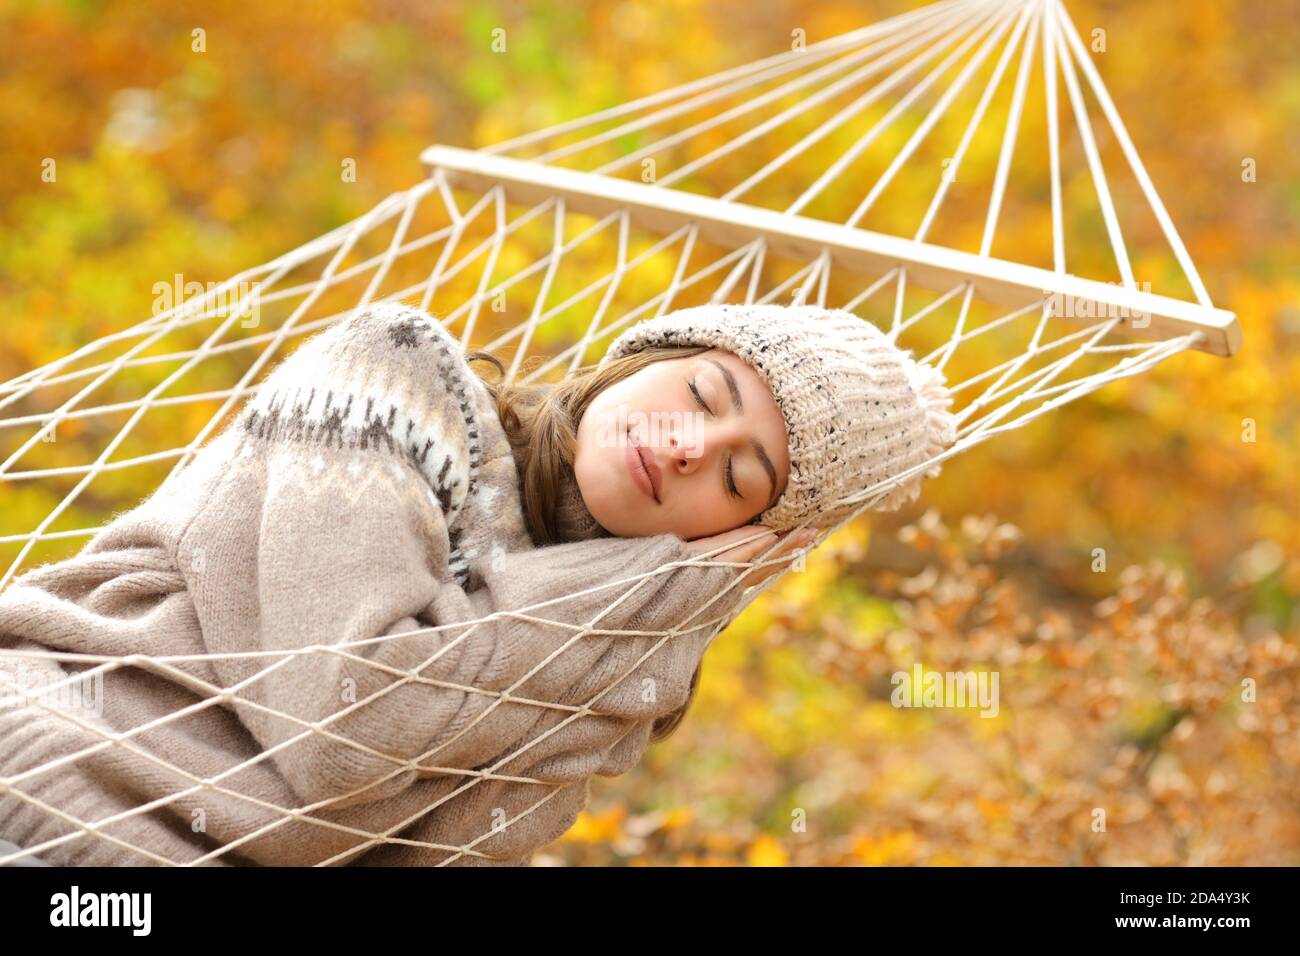 Beauty woman sleeping comfortably on rope hammock in a forest in fall season Stock Photo